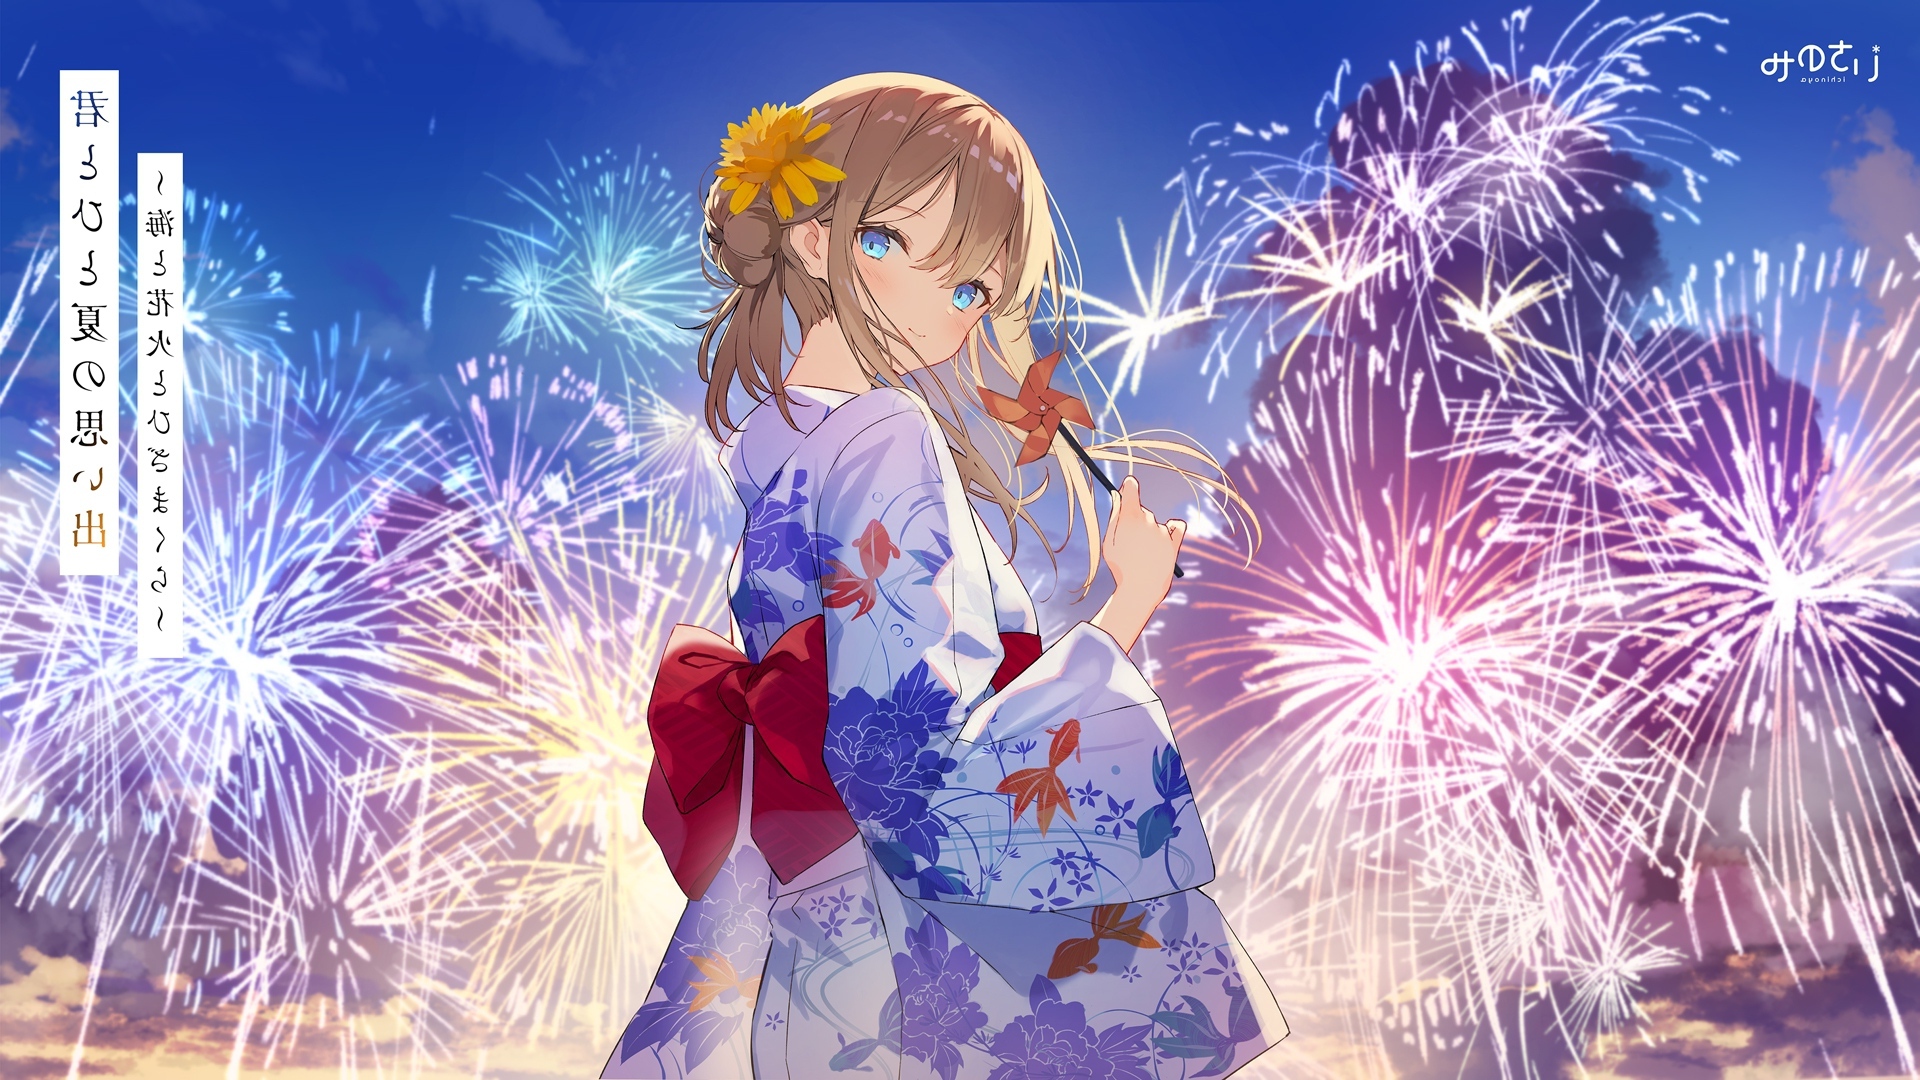 Independence Day Happy 4th July USA American Flag Anime Girl